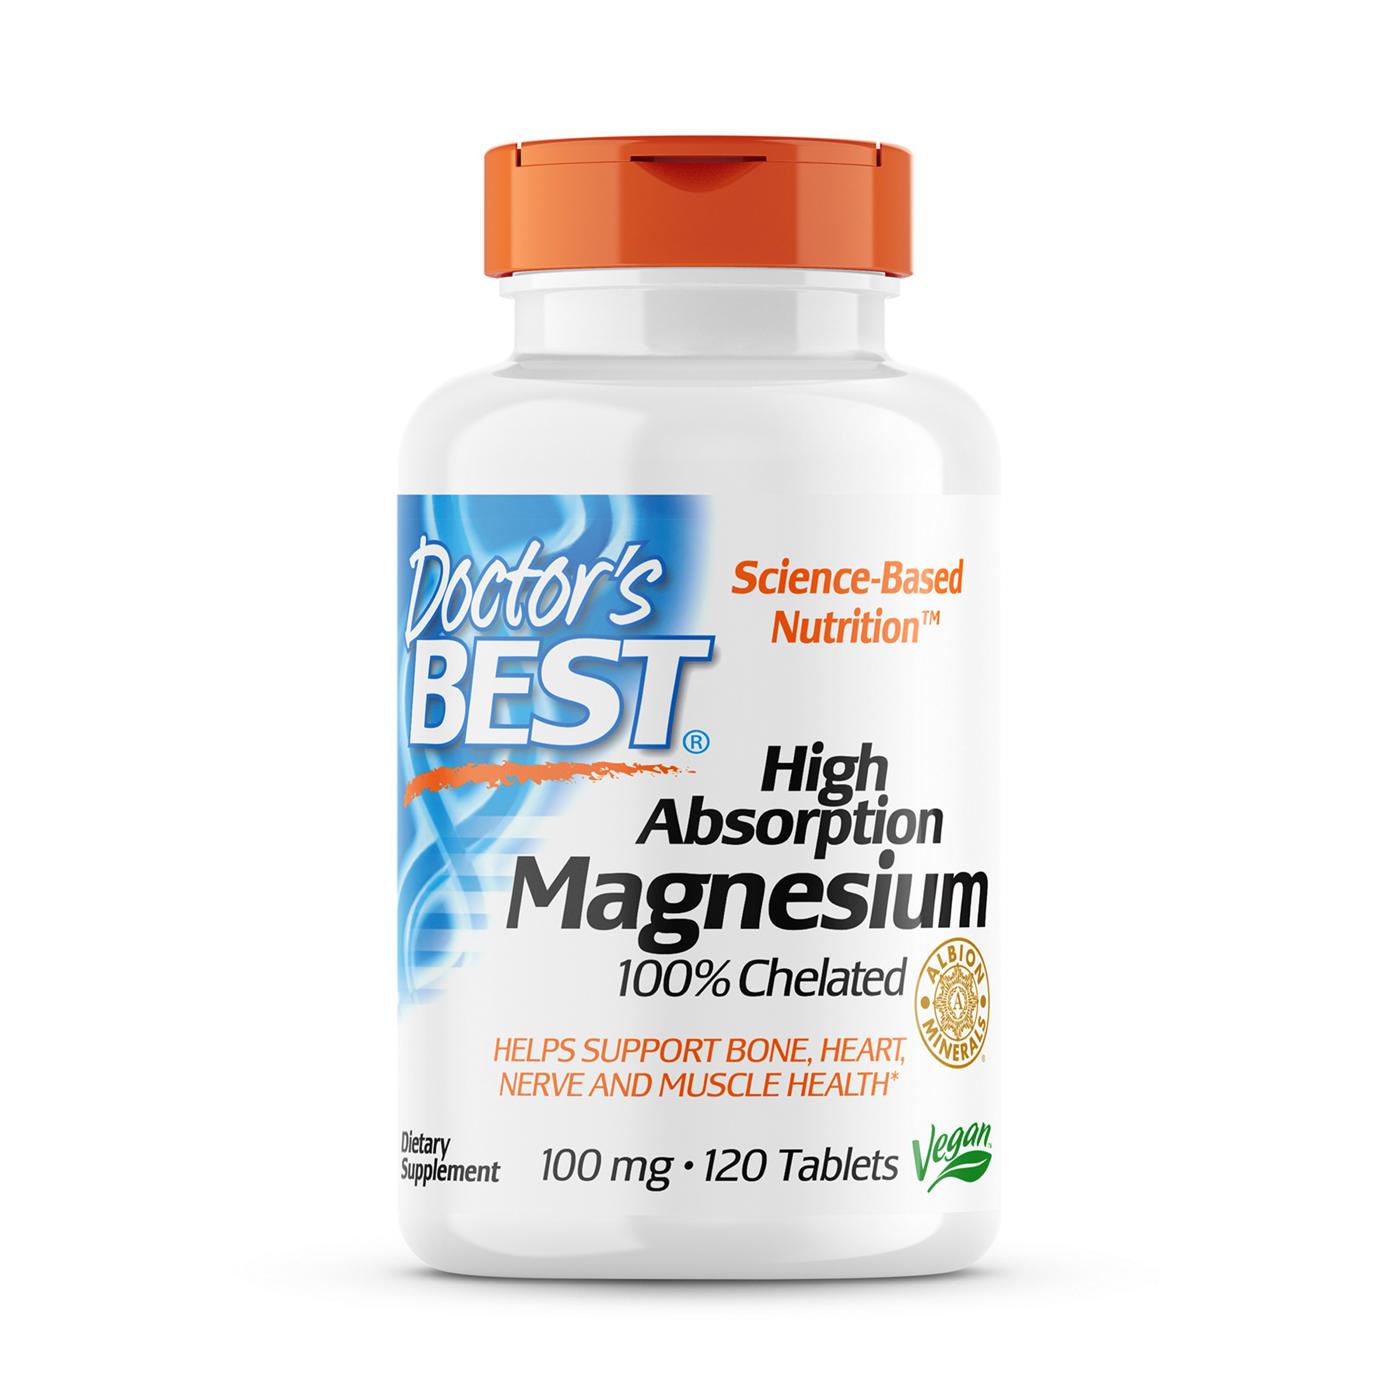 Doctor's Best Hi Abs 100% Chelated Magnesium; image 1 of 2